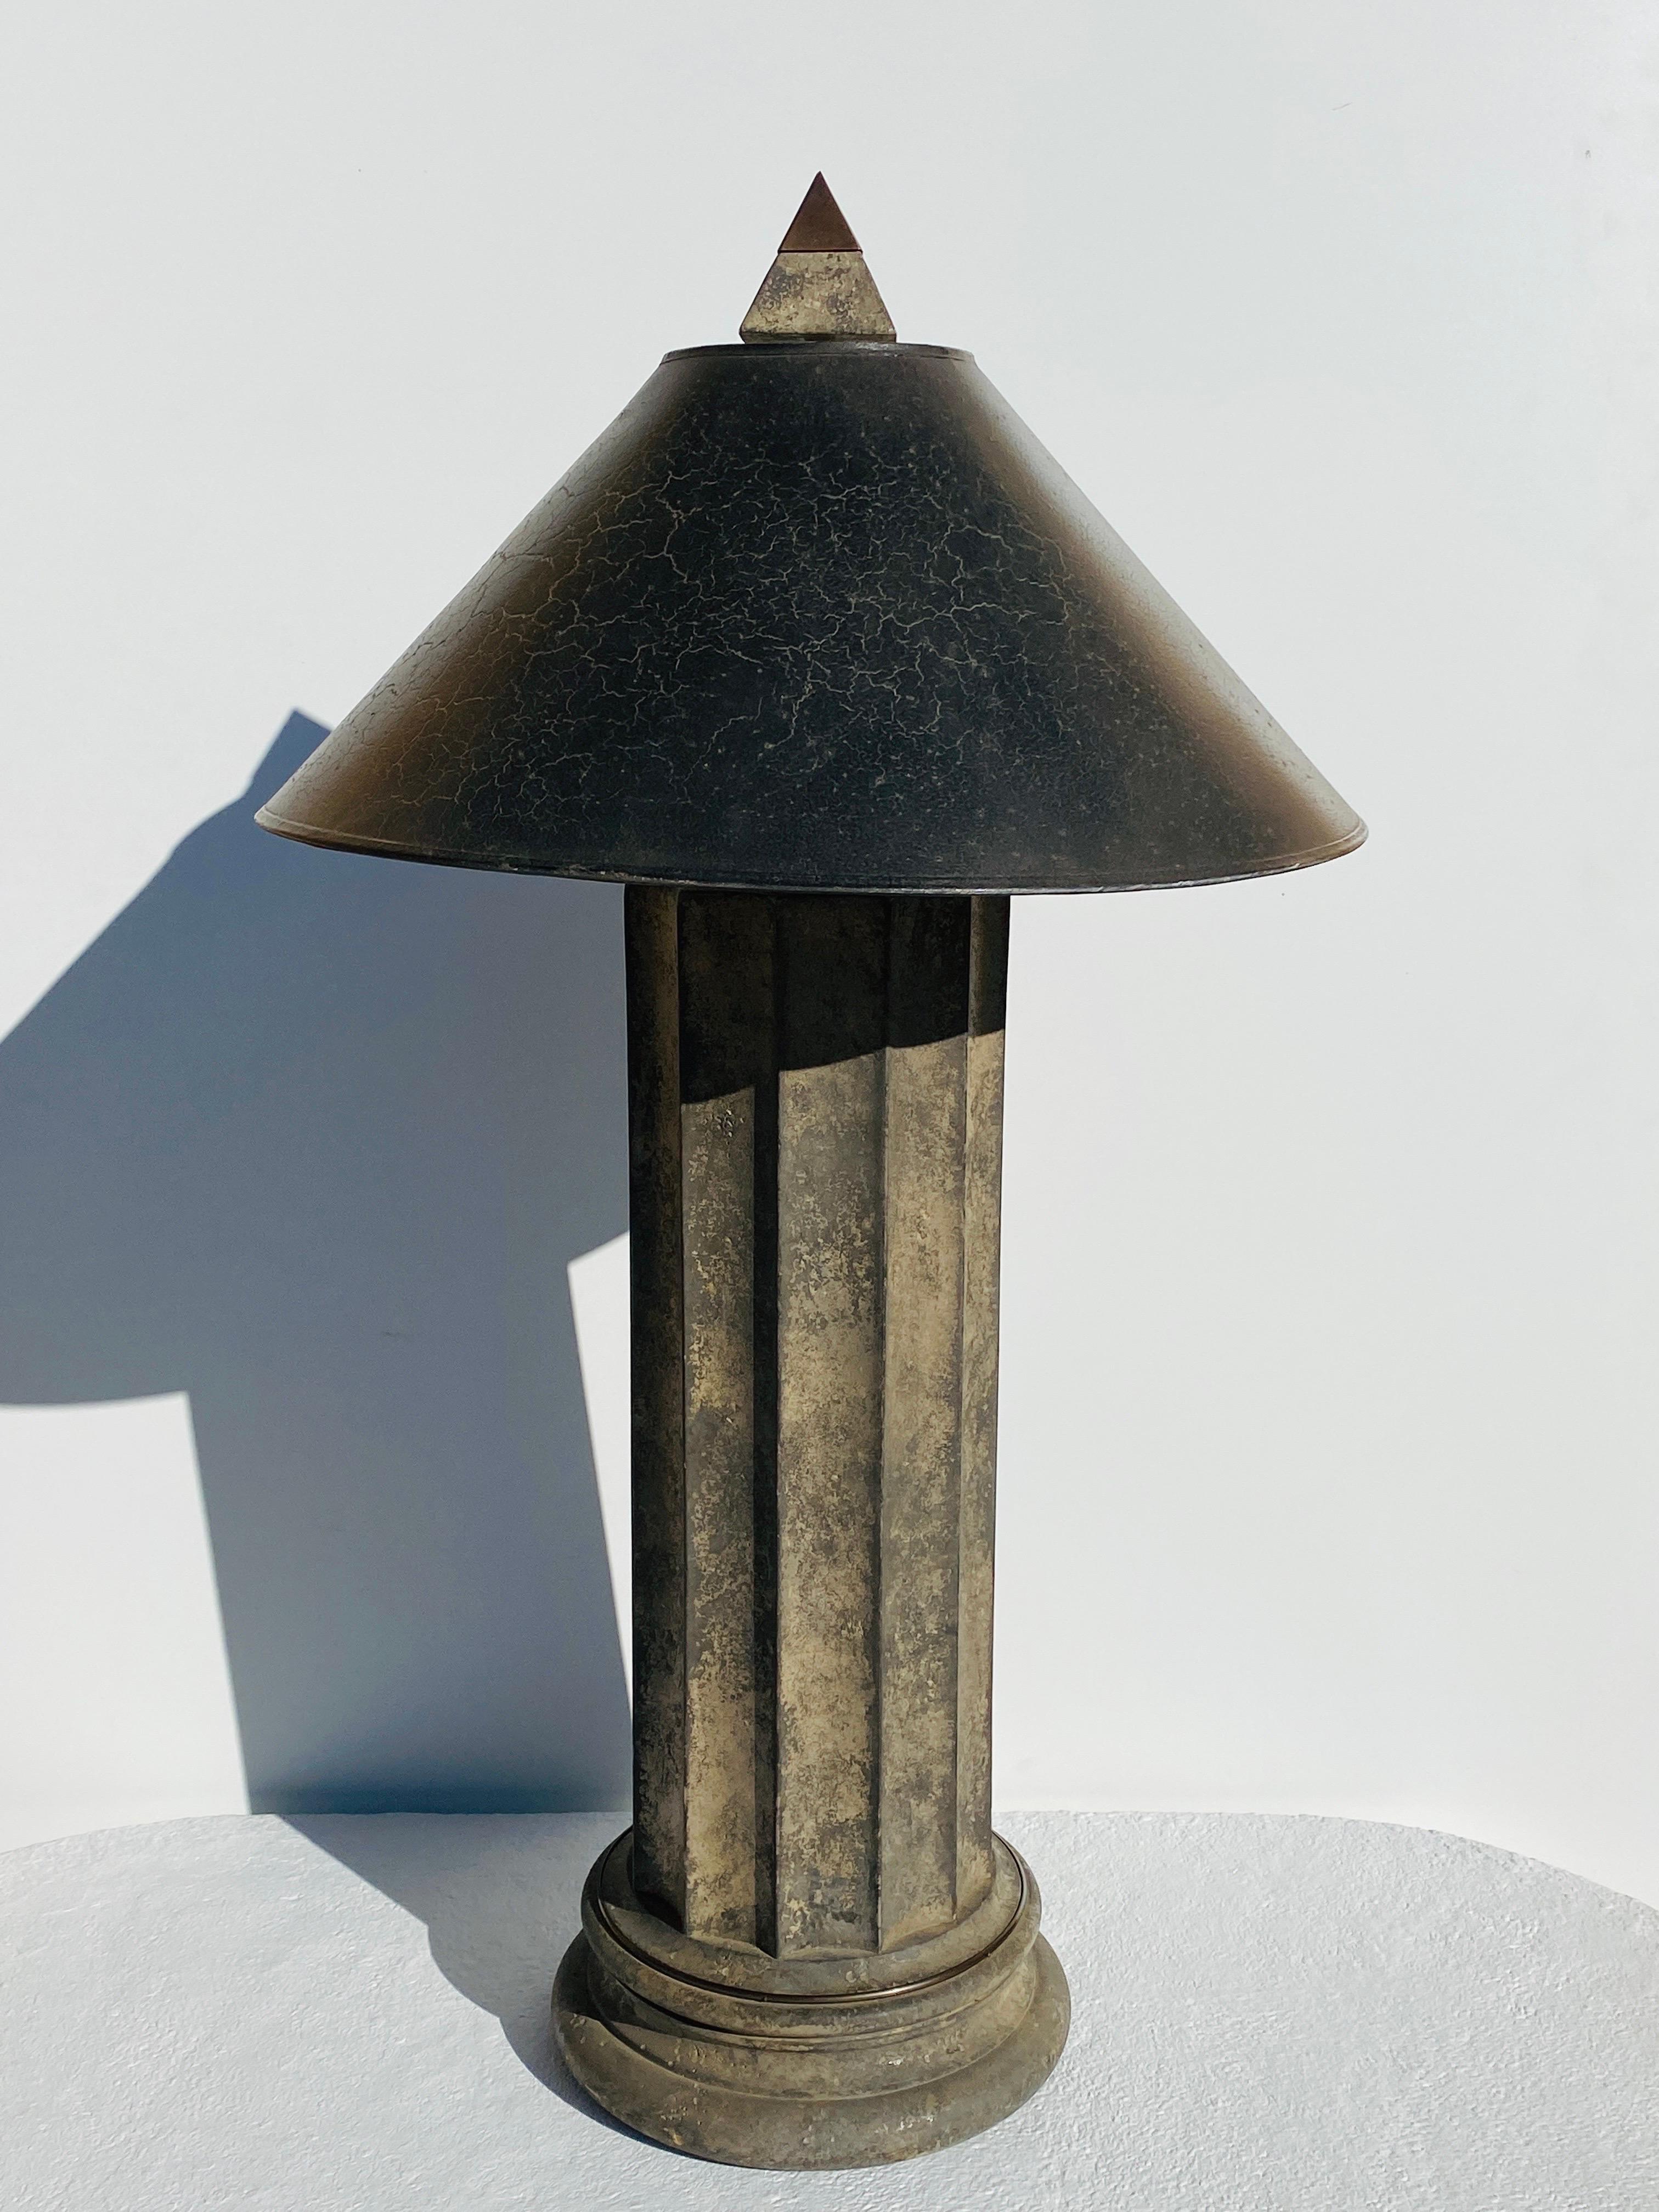 80’s Faux stone architectural doric column lamp with brass accents and crackle finish lampshade. Lampshade is 21.5